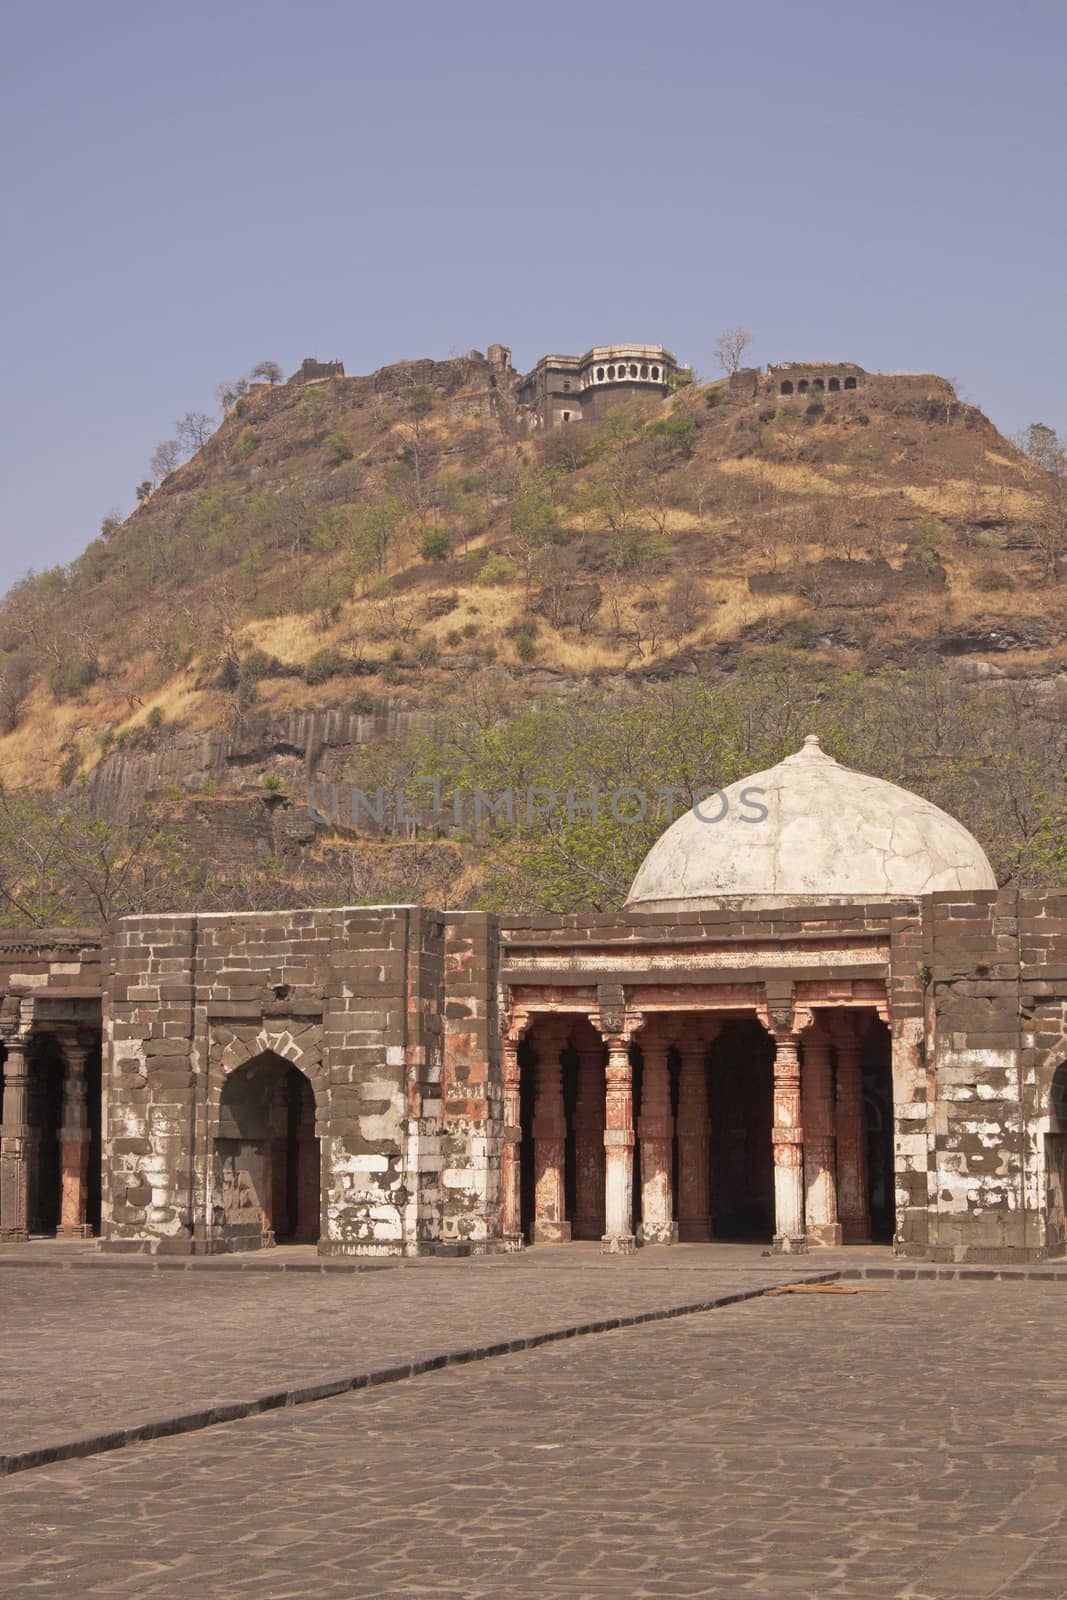 Mosque inside Daulatabad Fortress, India. Citadel of the fort on the hilltop in the distance. 14th Century AD